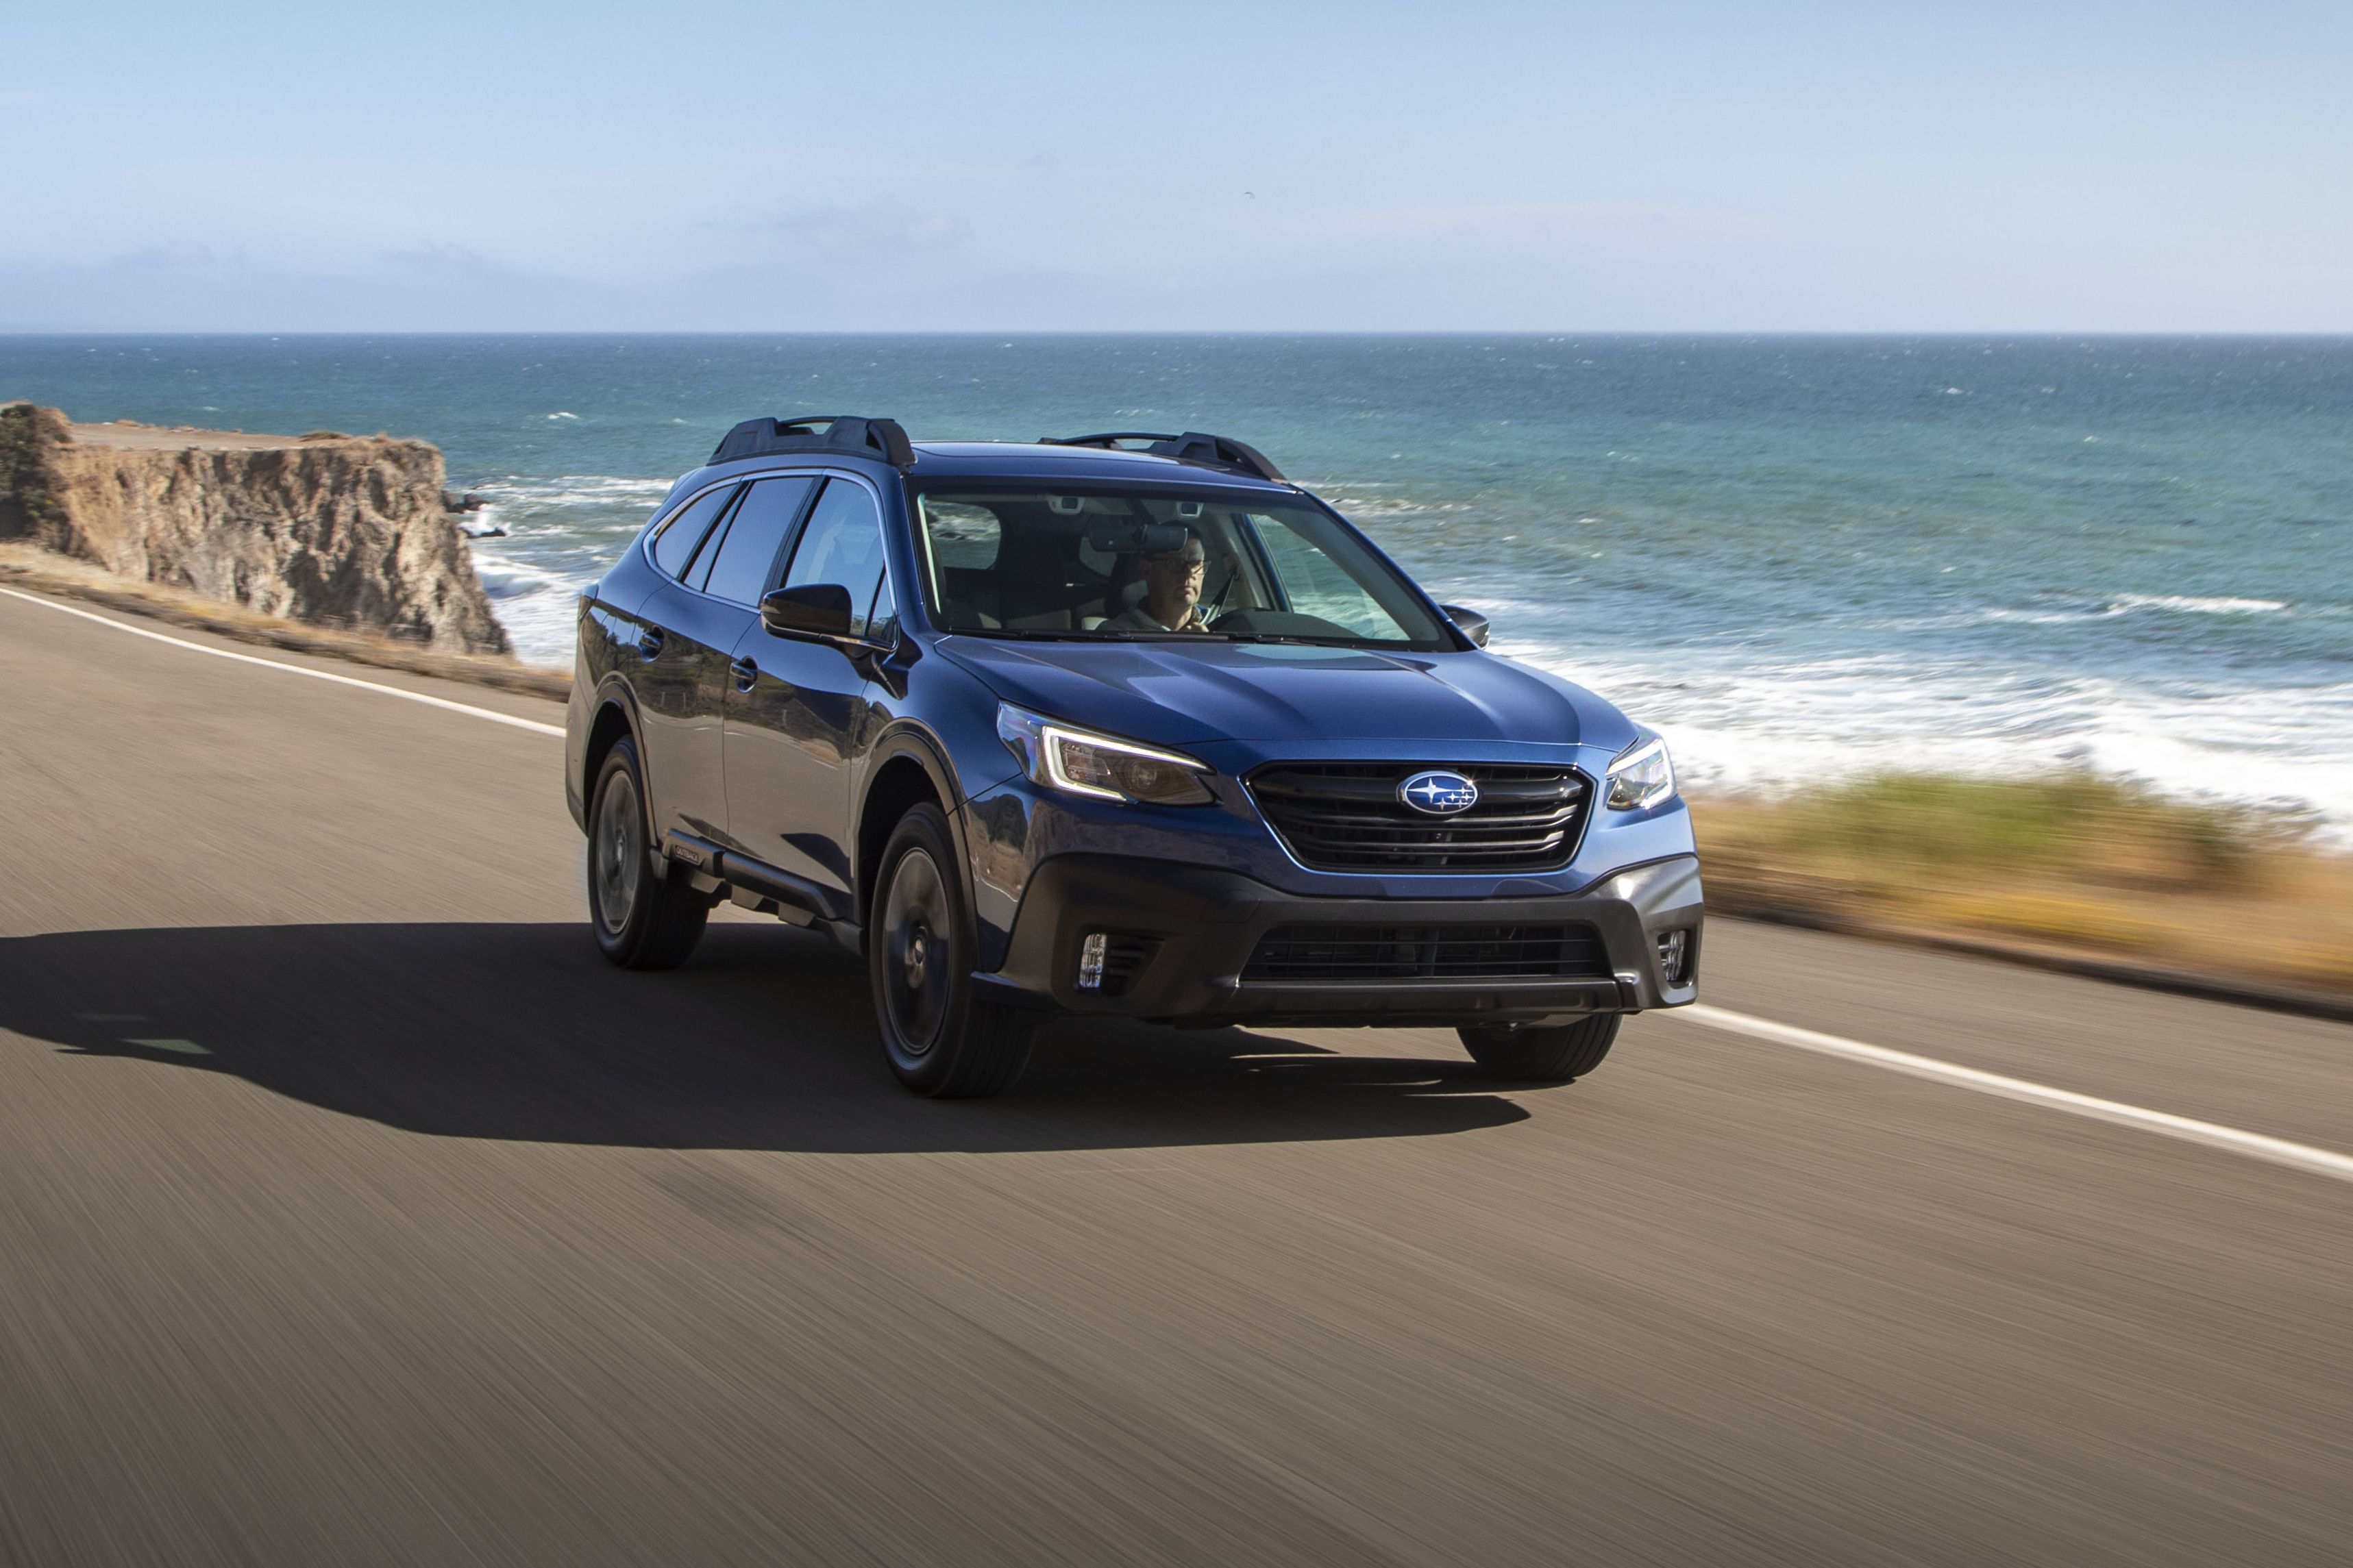 2021 Subaru Outback Pricing, and Specs